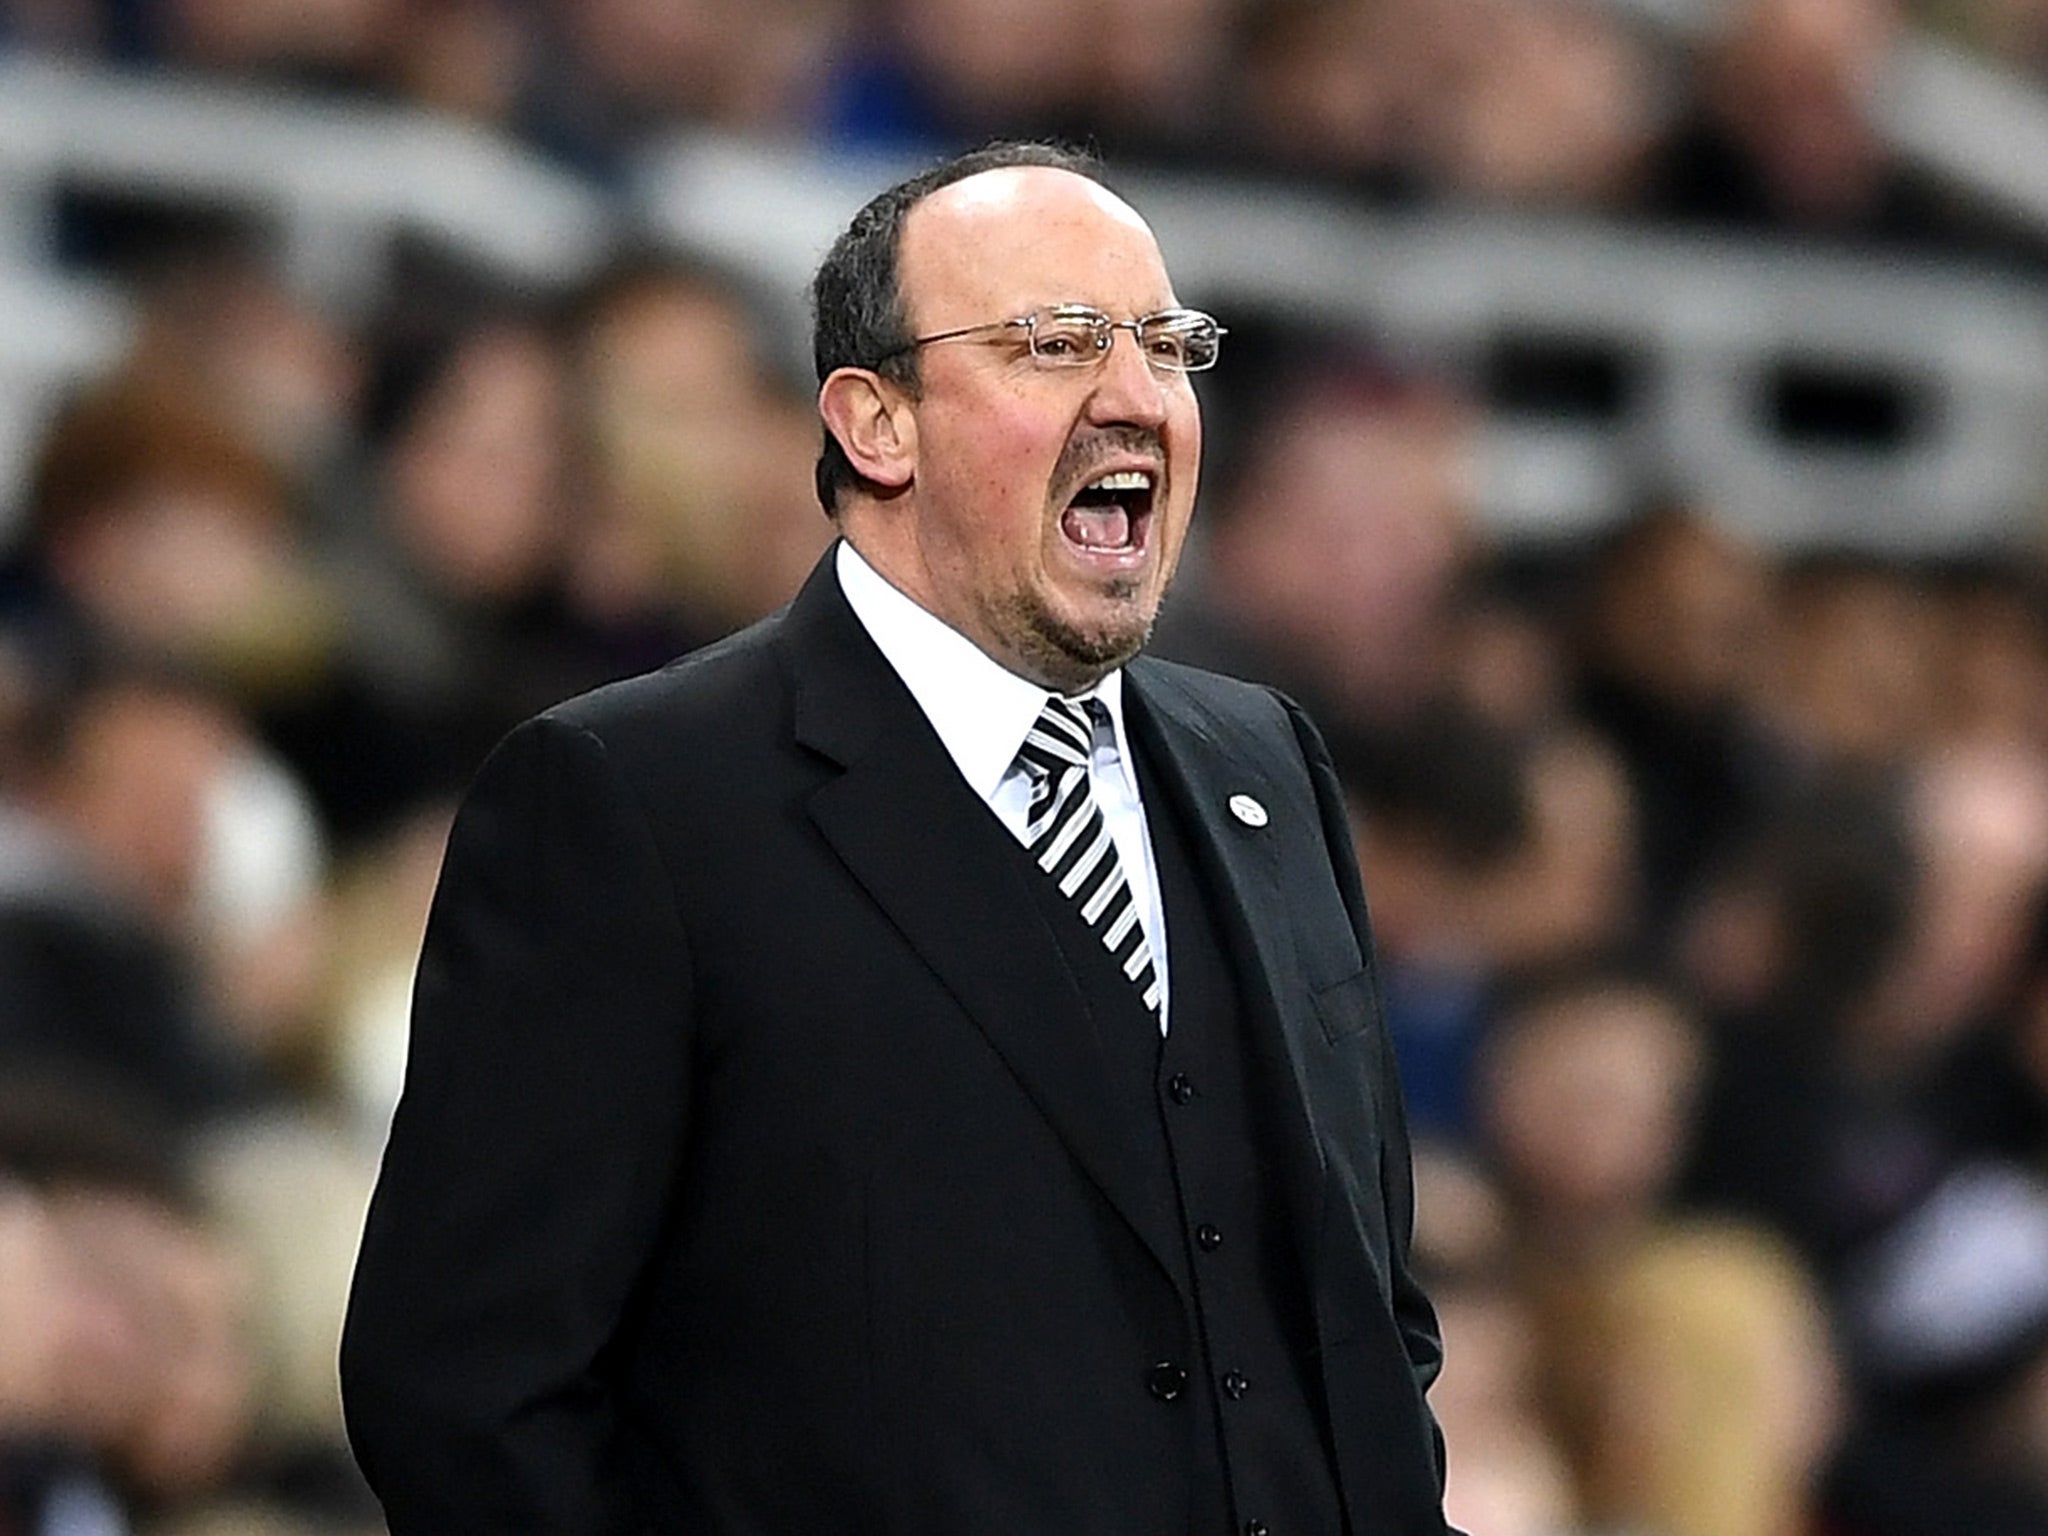 Benitez insisted he would stay for the rest of the season